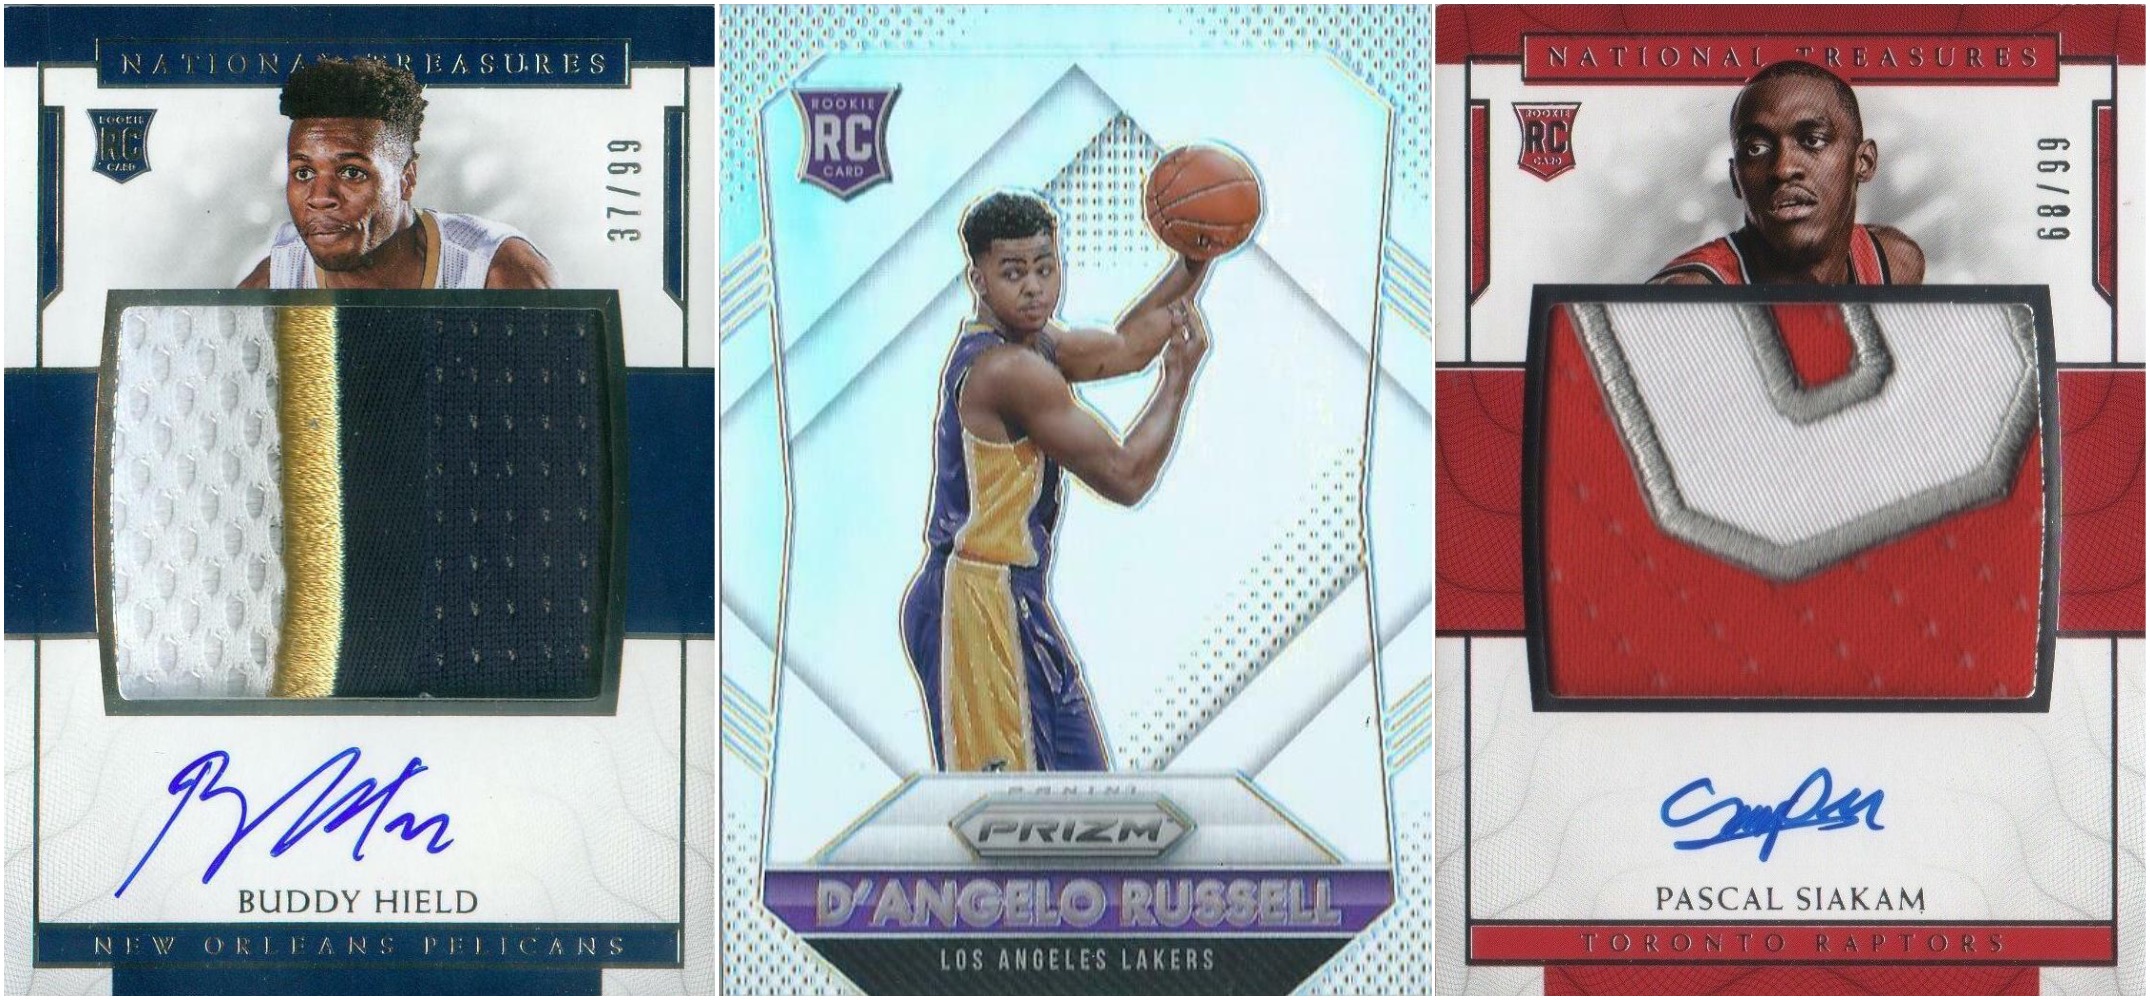 Image of three different Buddy Hield sports trading cards